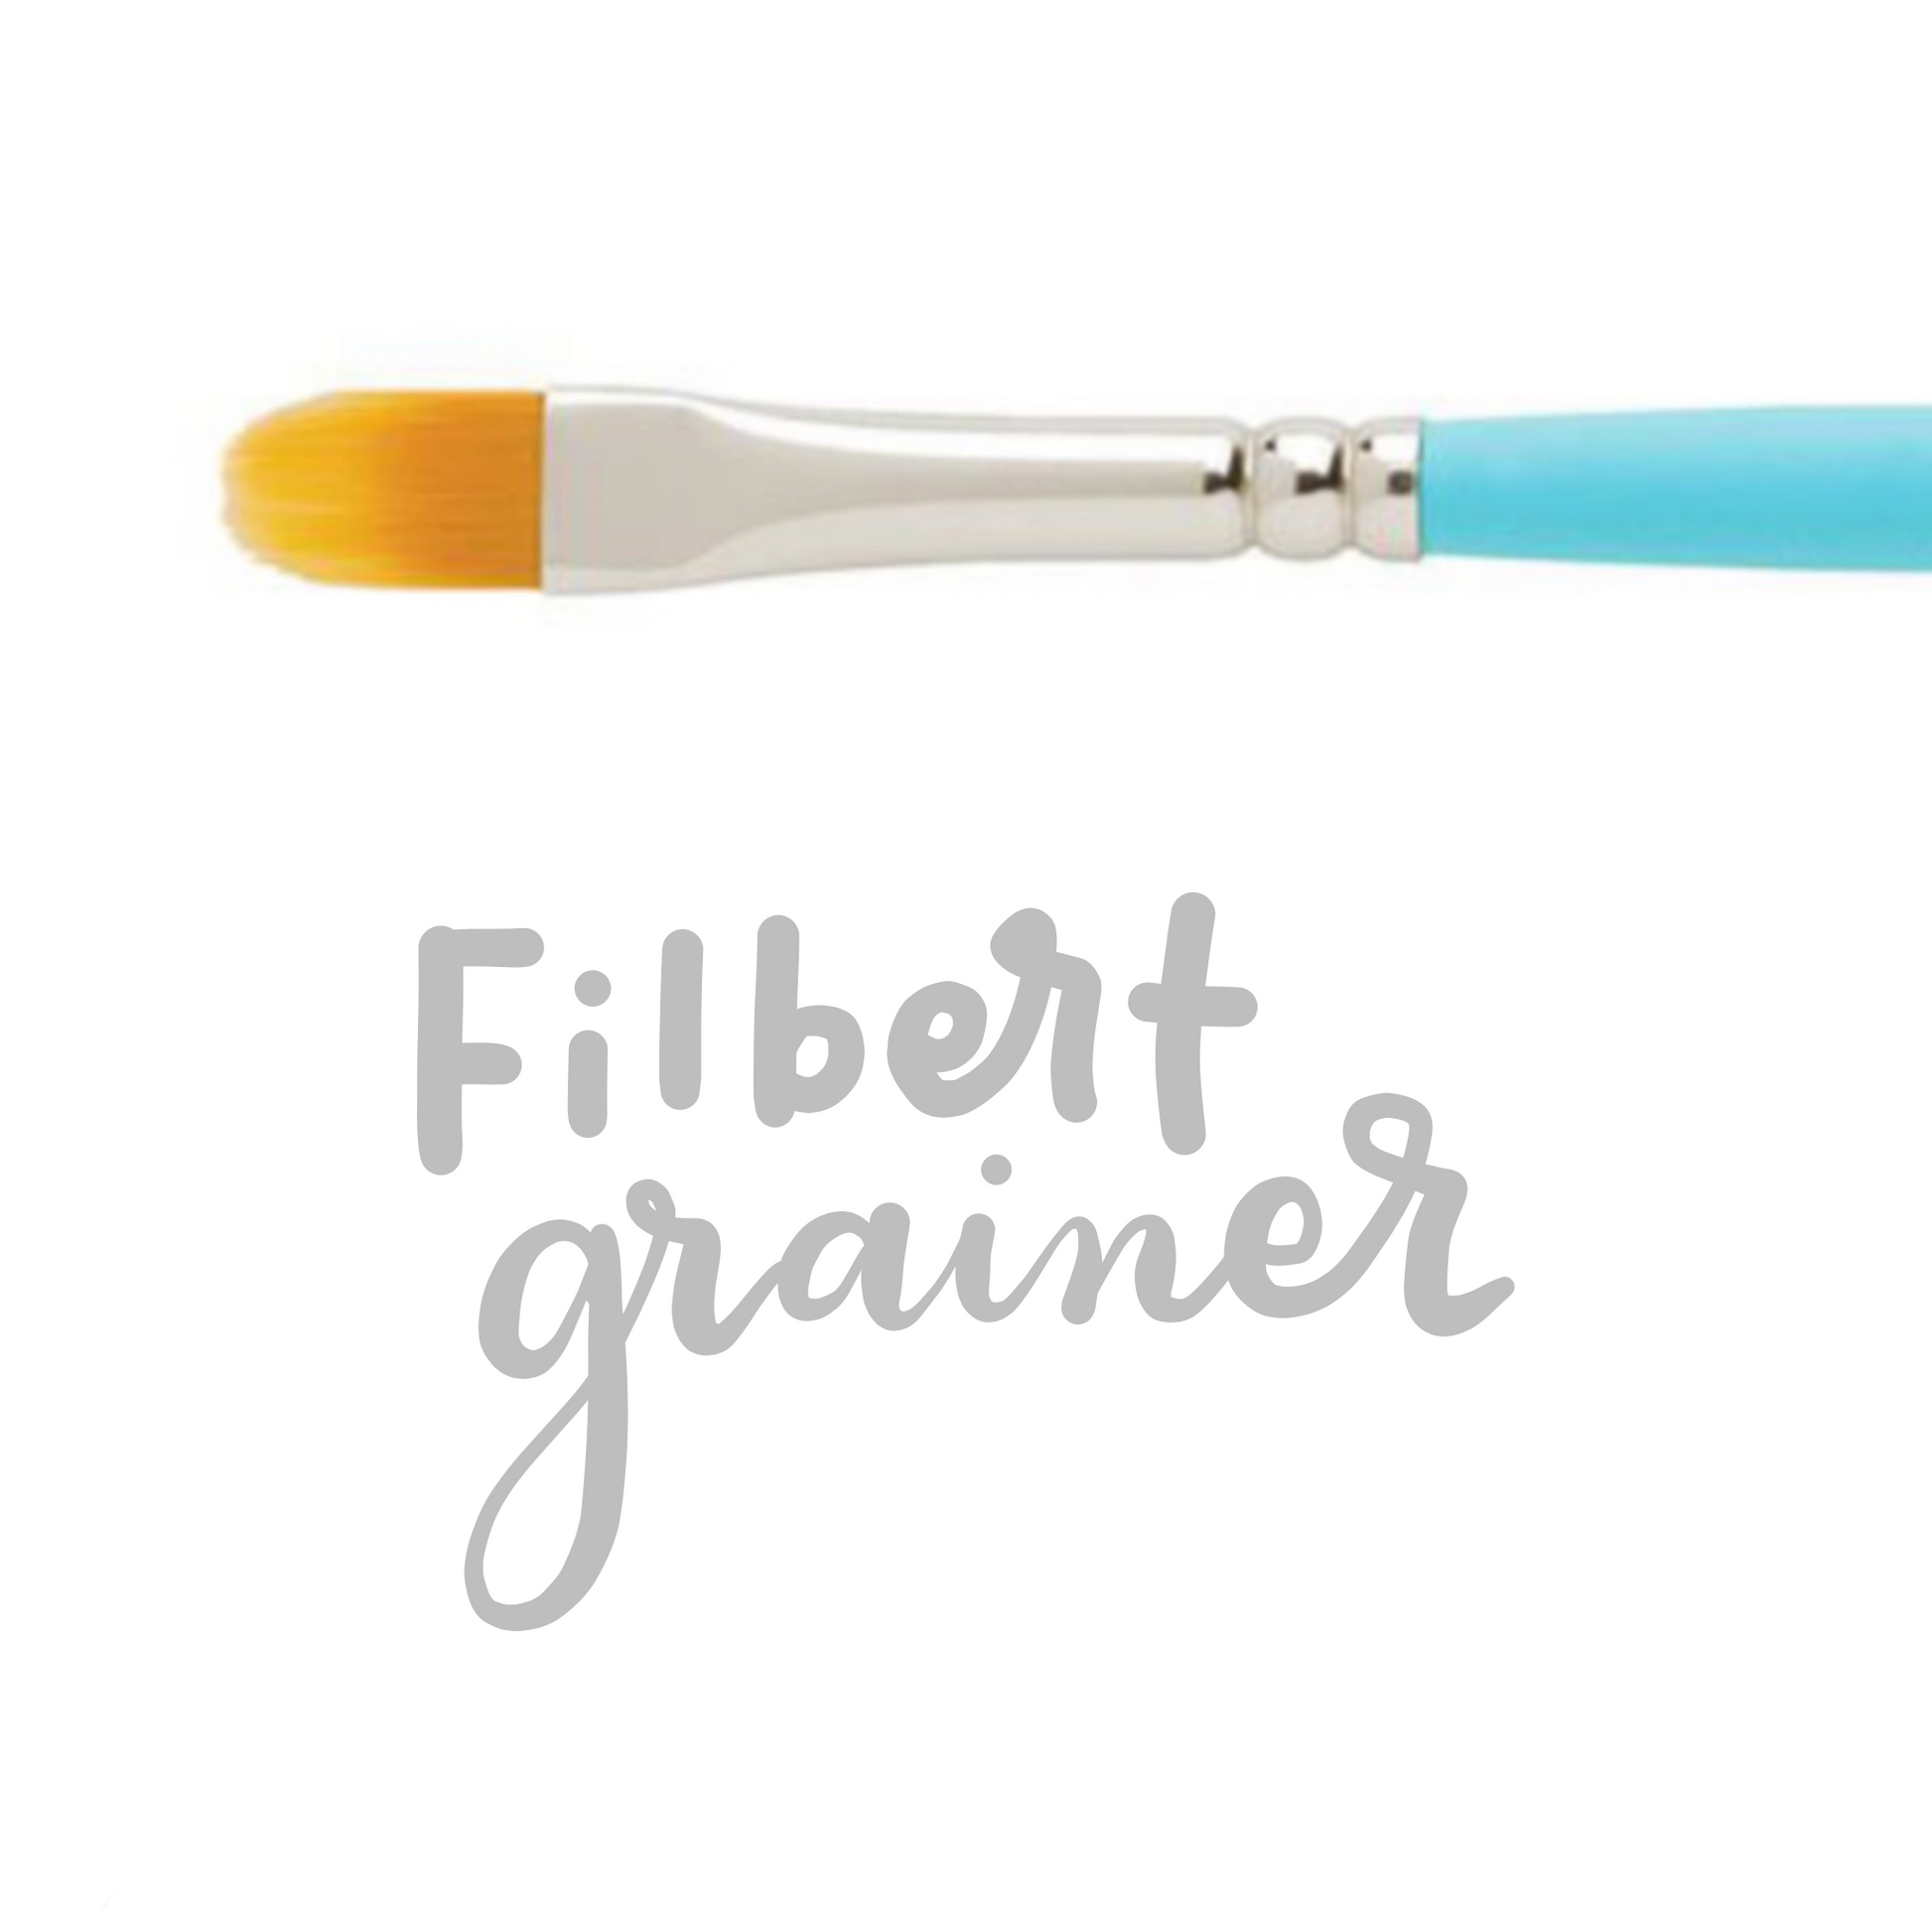 Select Filbert 8 by Princeton Brush - Brushes and More